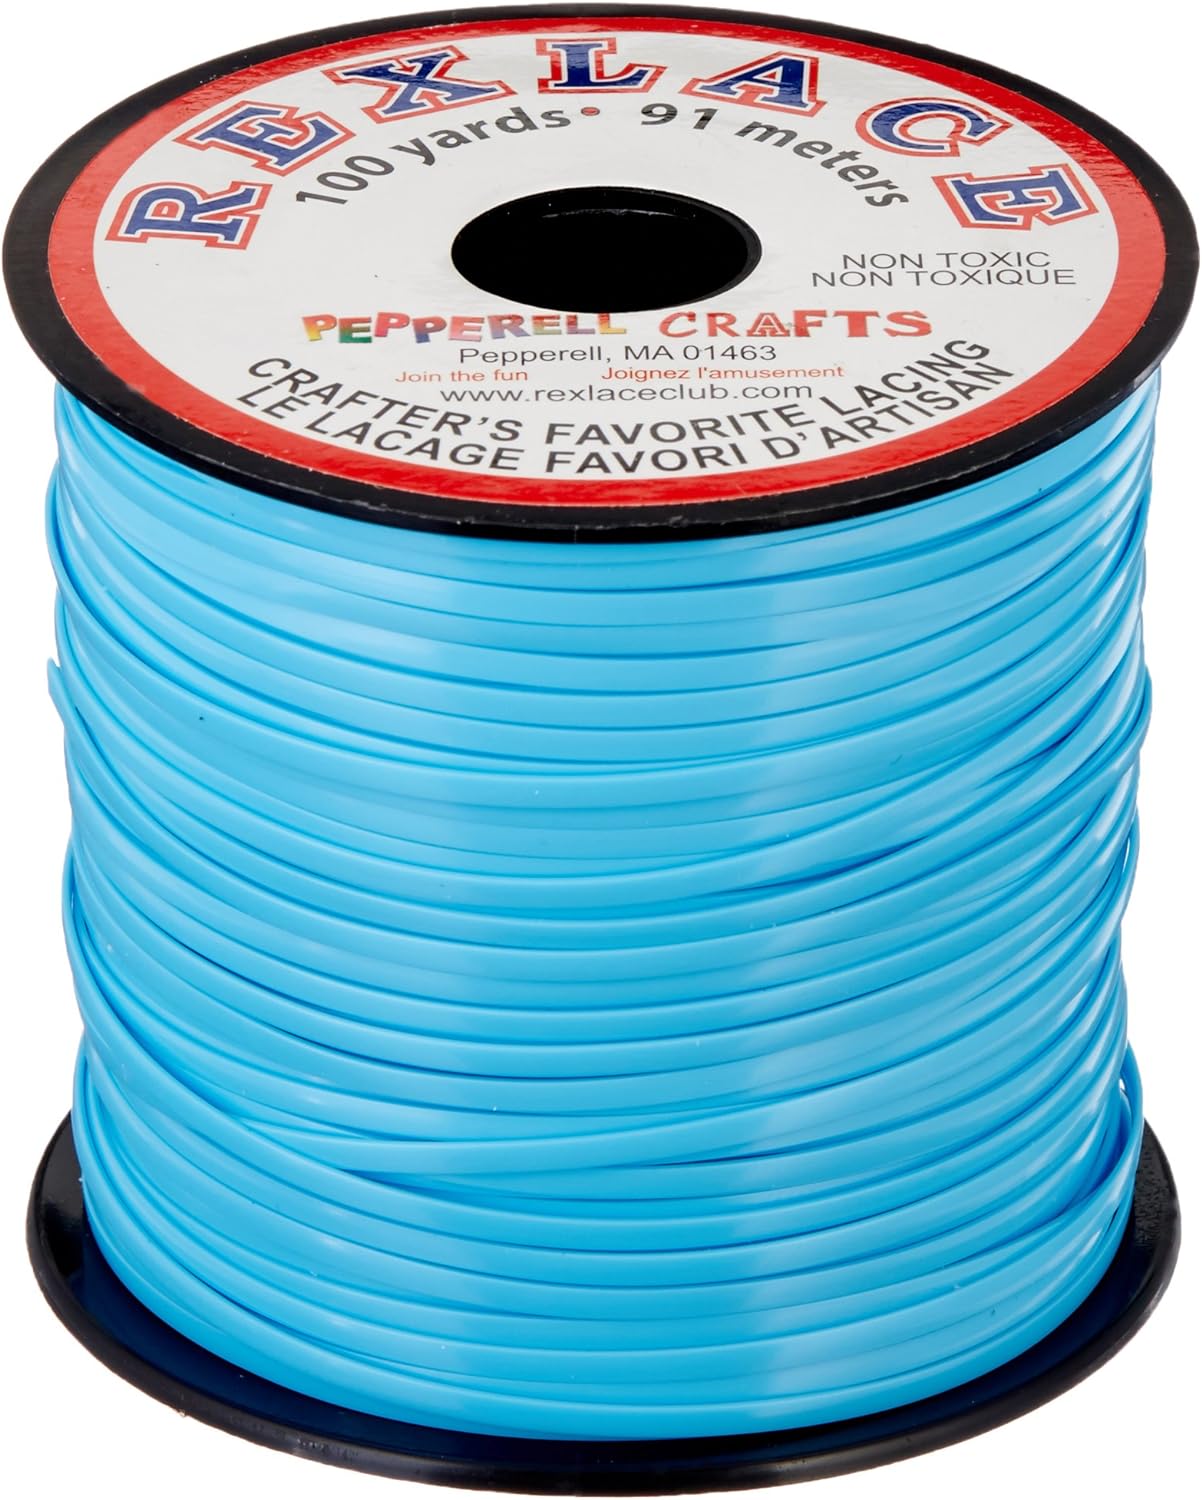 Pepperell Rexlace Plastic Lacing - 100 yards, Baby Blue - image 2 of 4